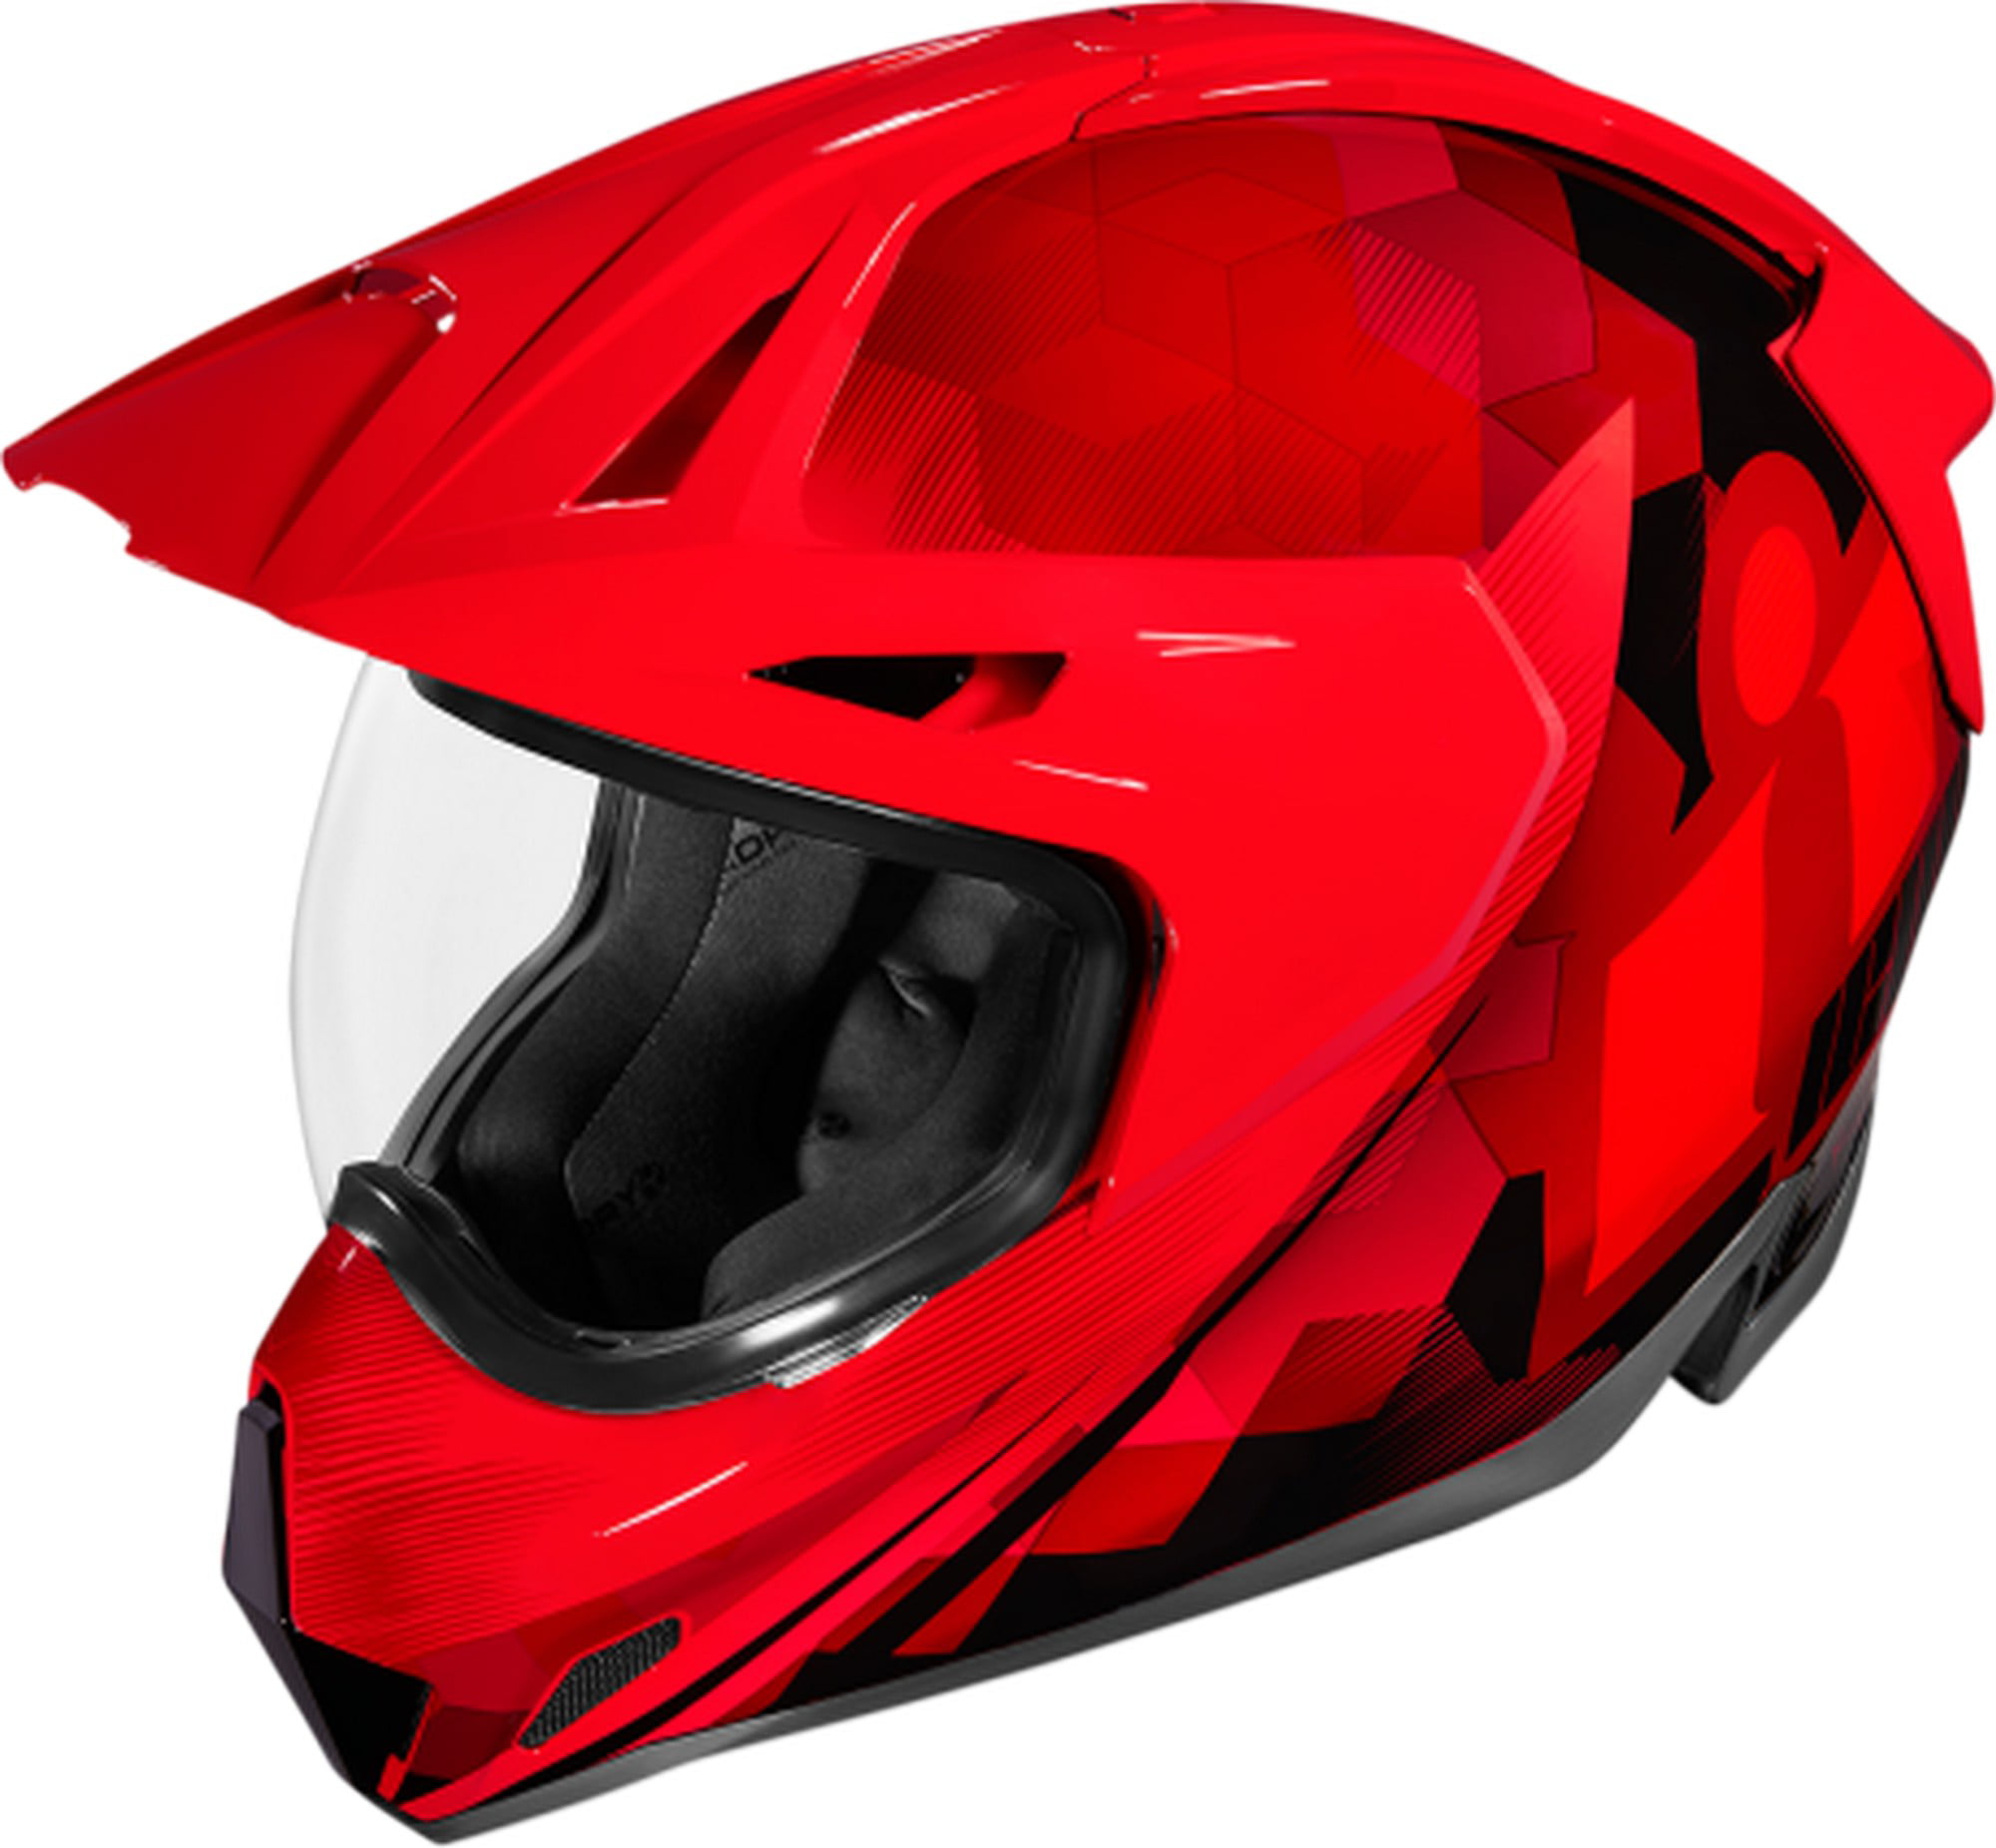 Helmet Motorcycle Scooter ECE 22-05 Sun Visor Full Face Graphic A-Pro Red